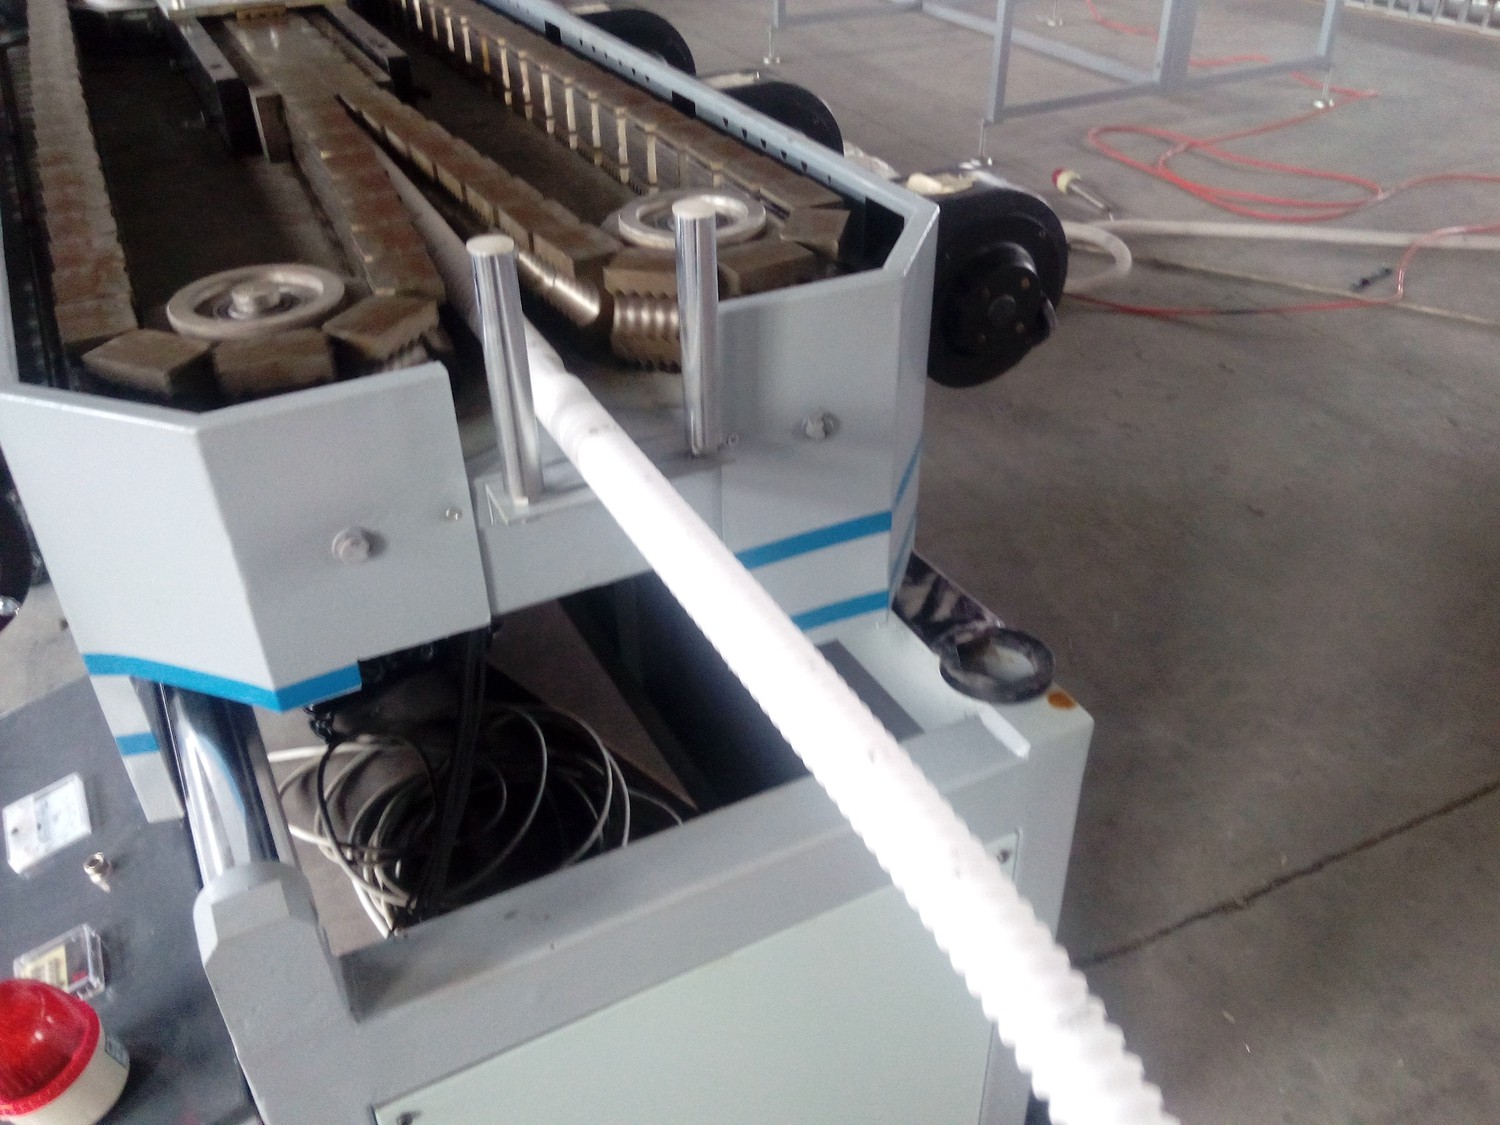 Magic corrugated pipe manufacturing machine with auto folding and cutting device